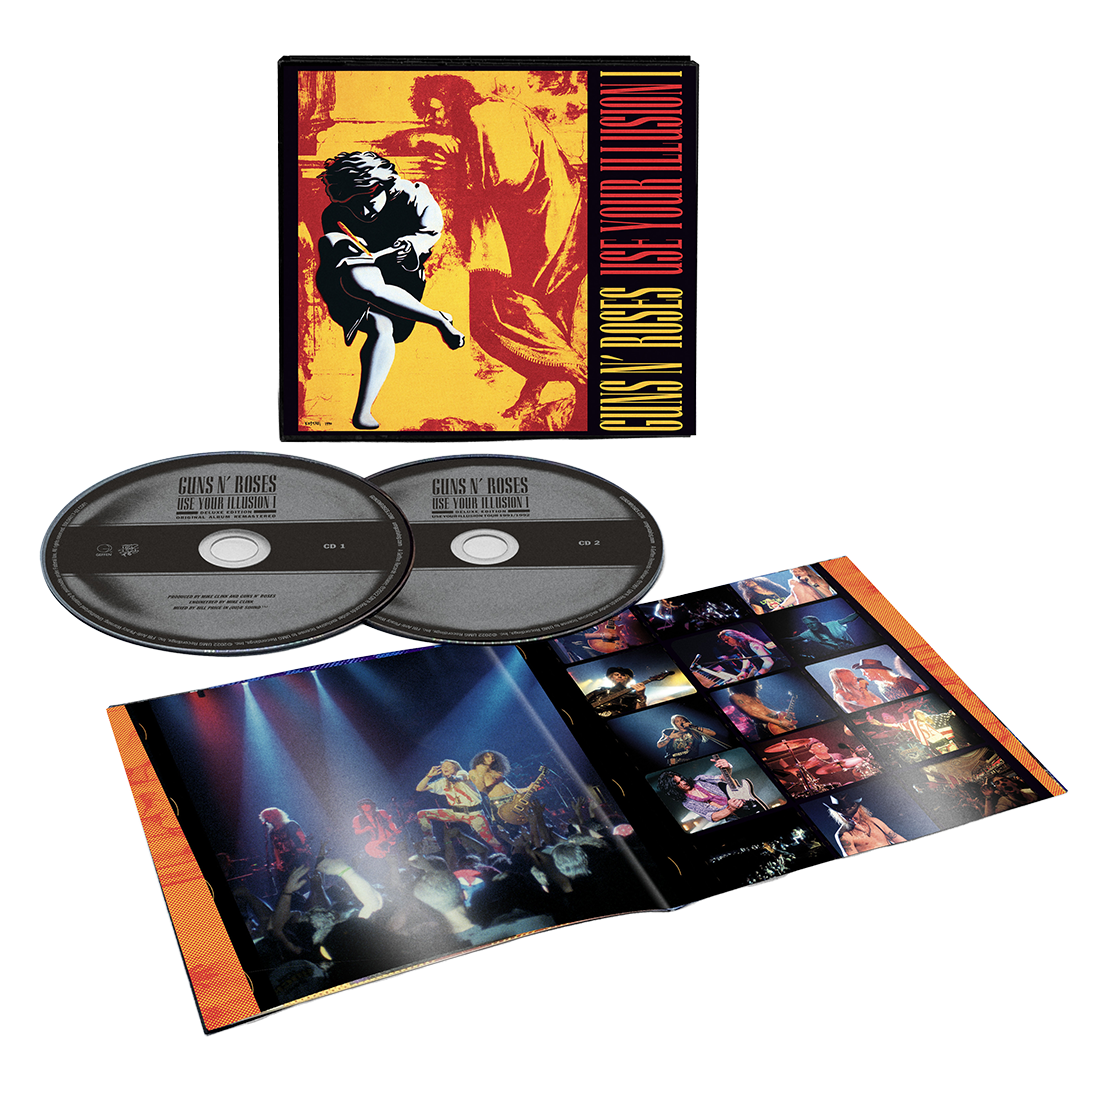 Use Your Illusion I Deluxe Edition [2CD]